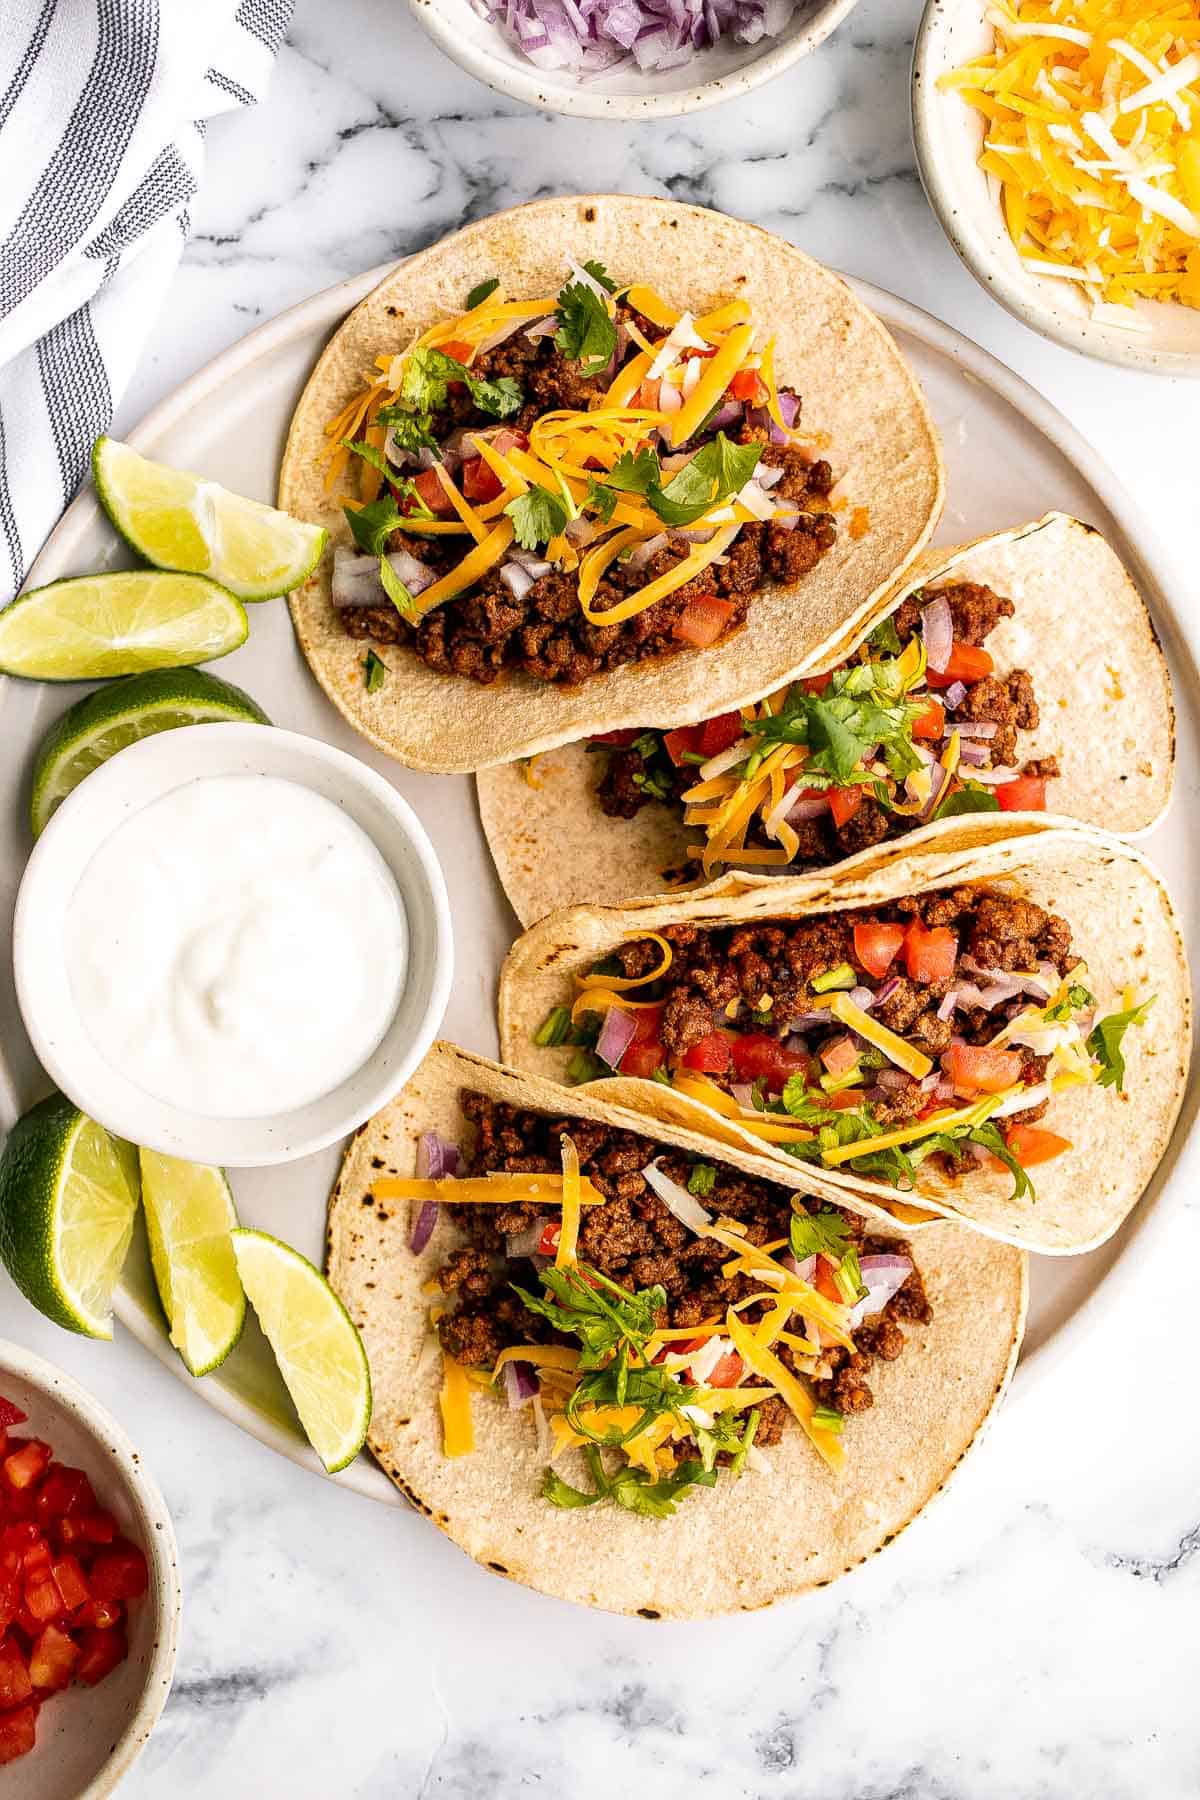 Traditional Mexican Ground Beef Taco Recipe - Infoupdate.org